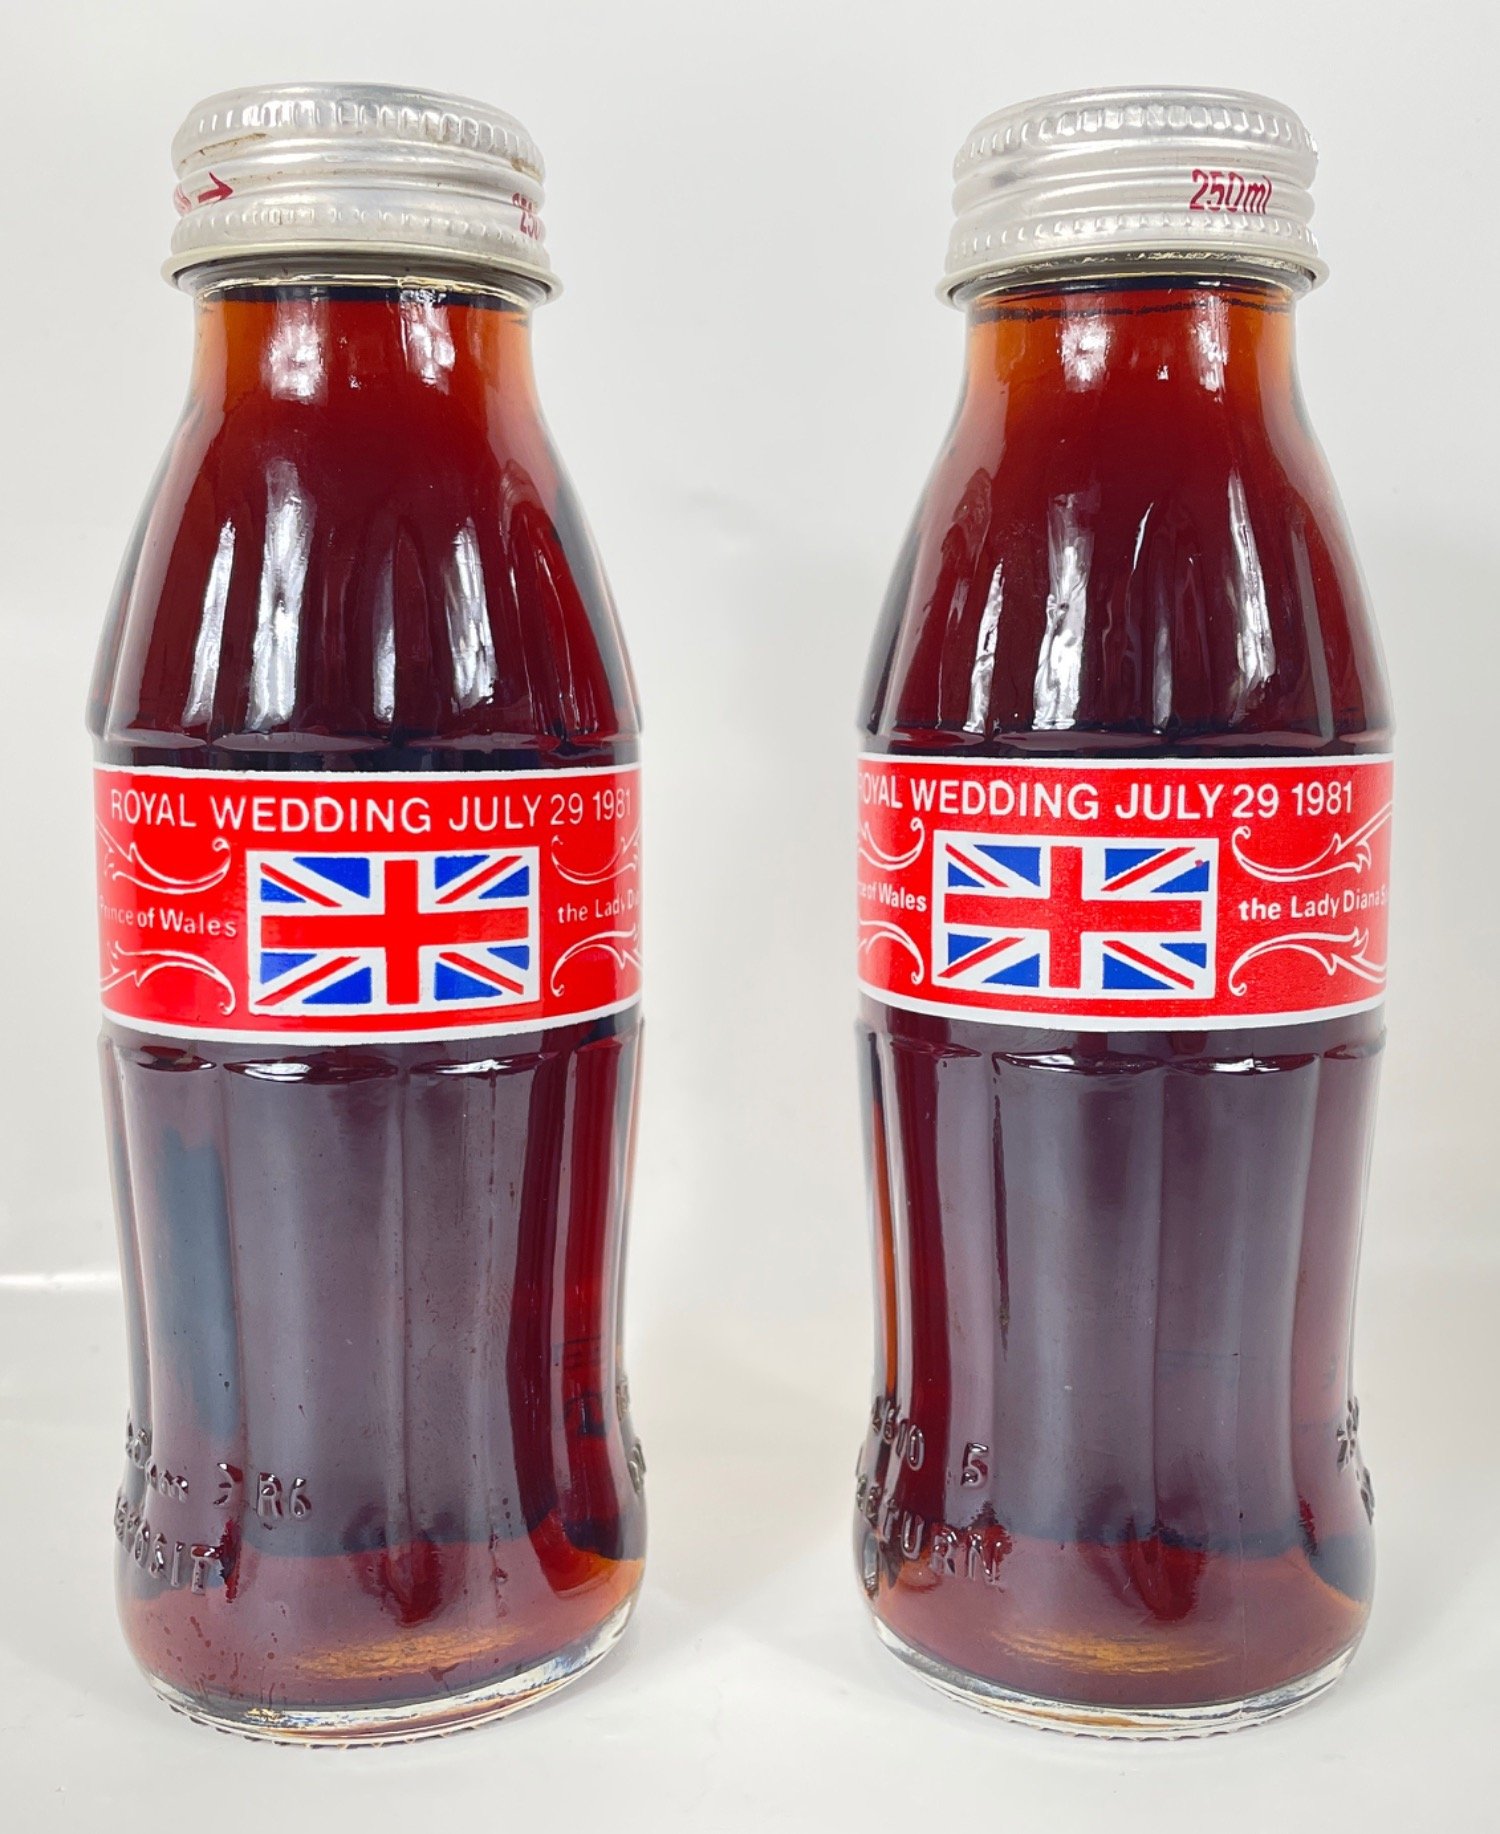 COCA-COLA - not one but two unopened souvenir 250ml bottles celebrating the royal wedding in 1981